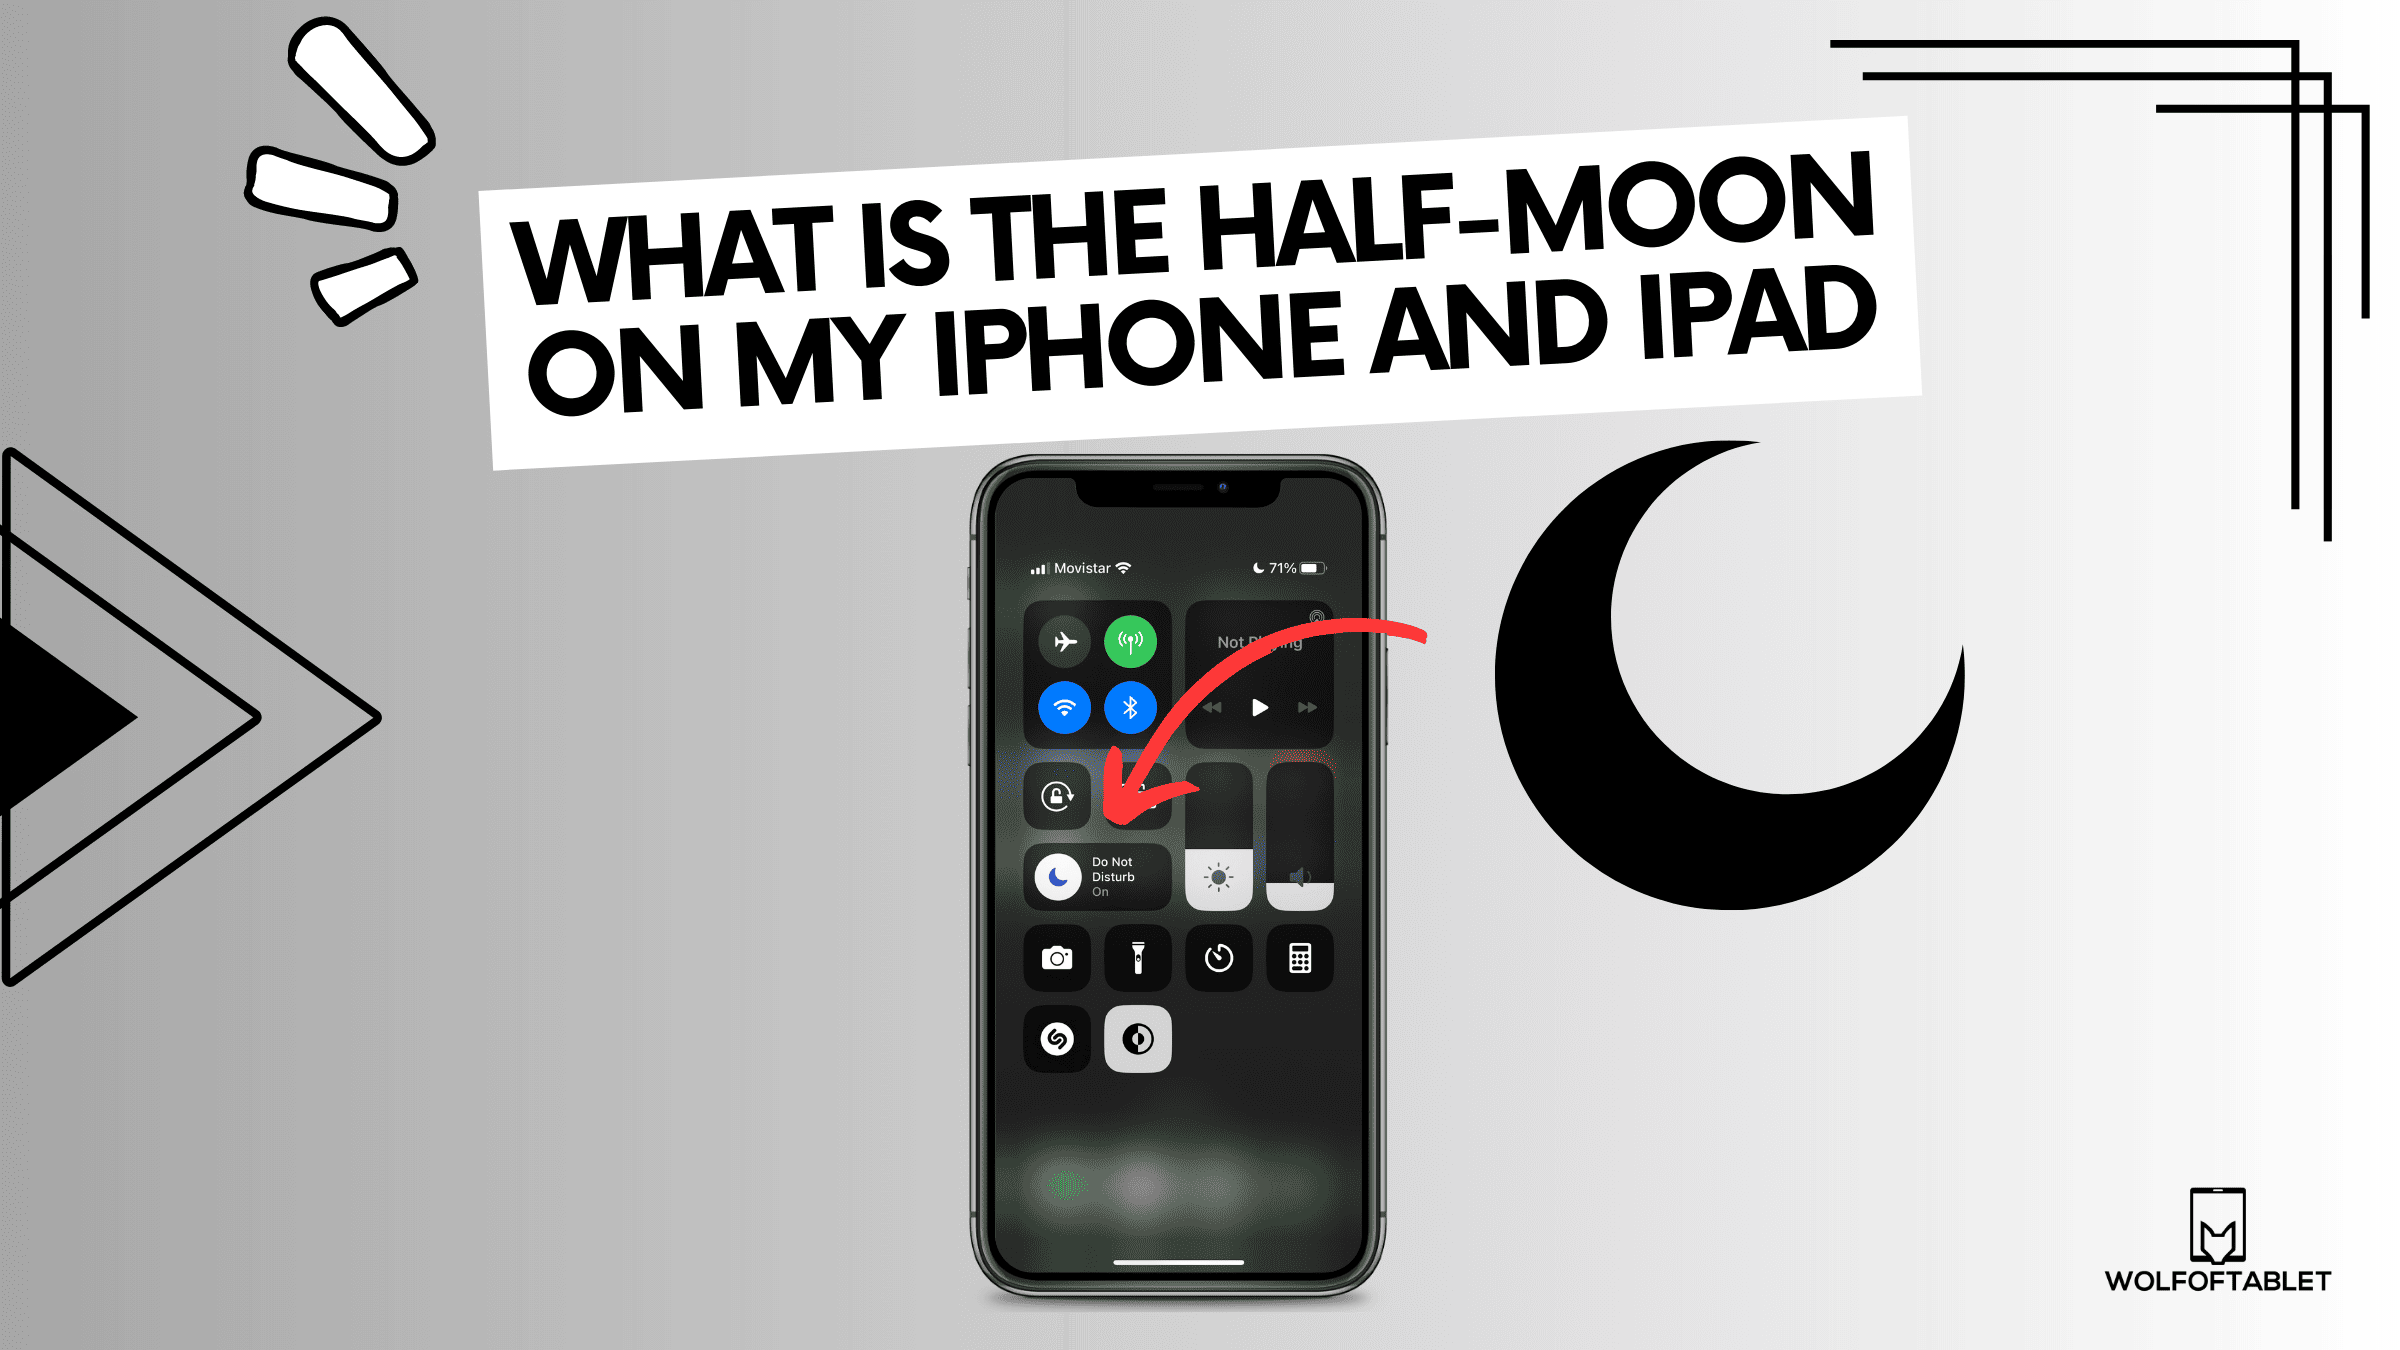 What Is The Half-Moon on My iPhone and iPad